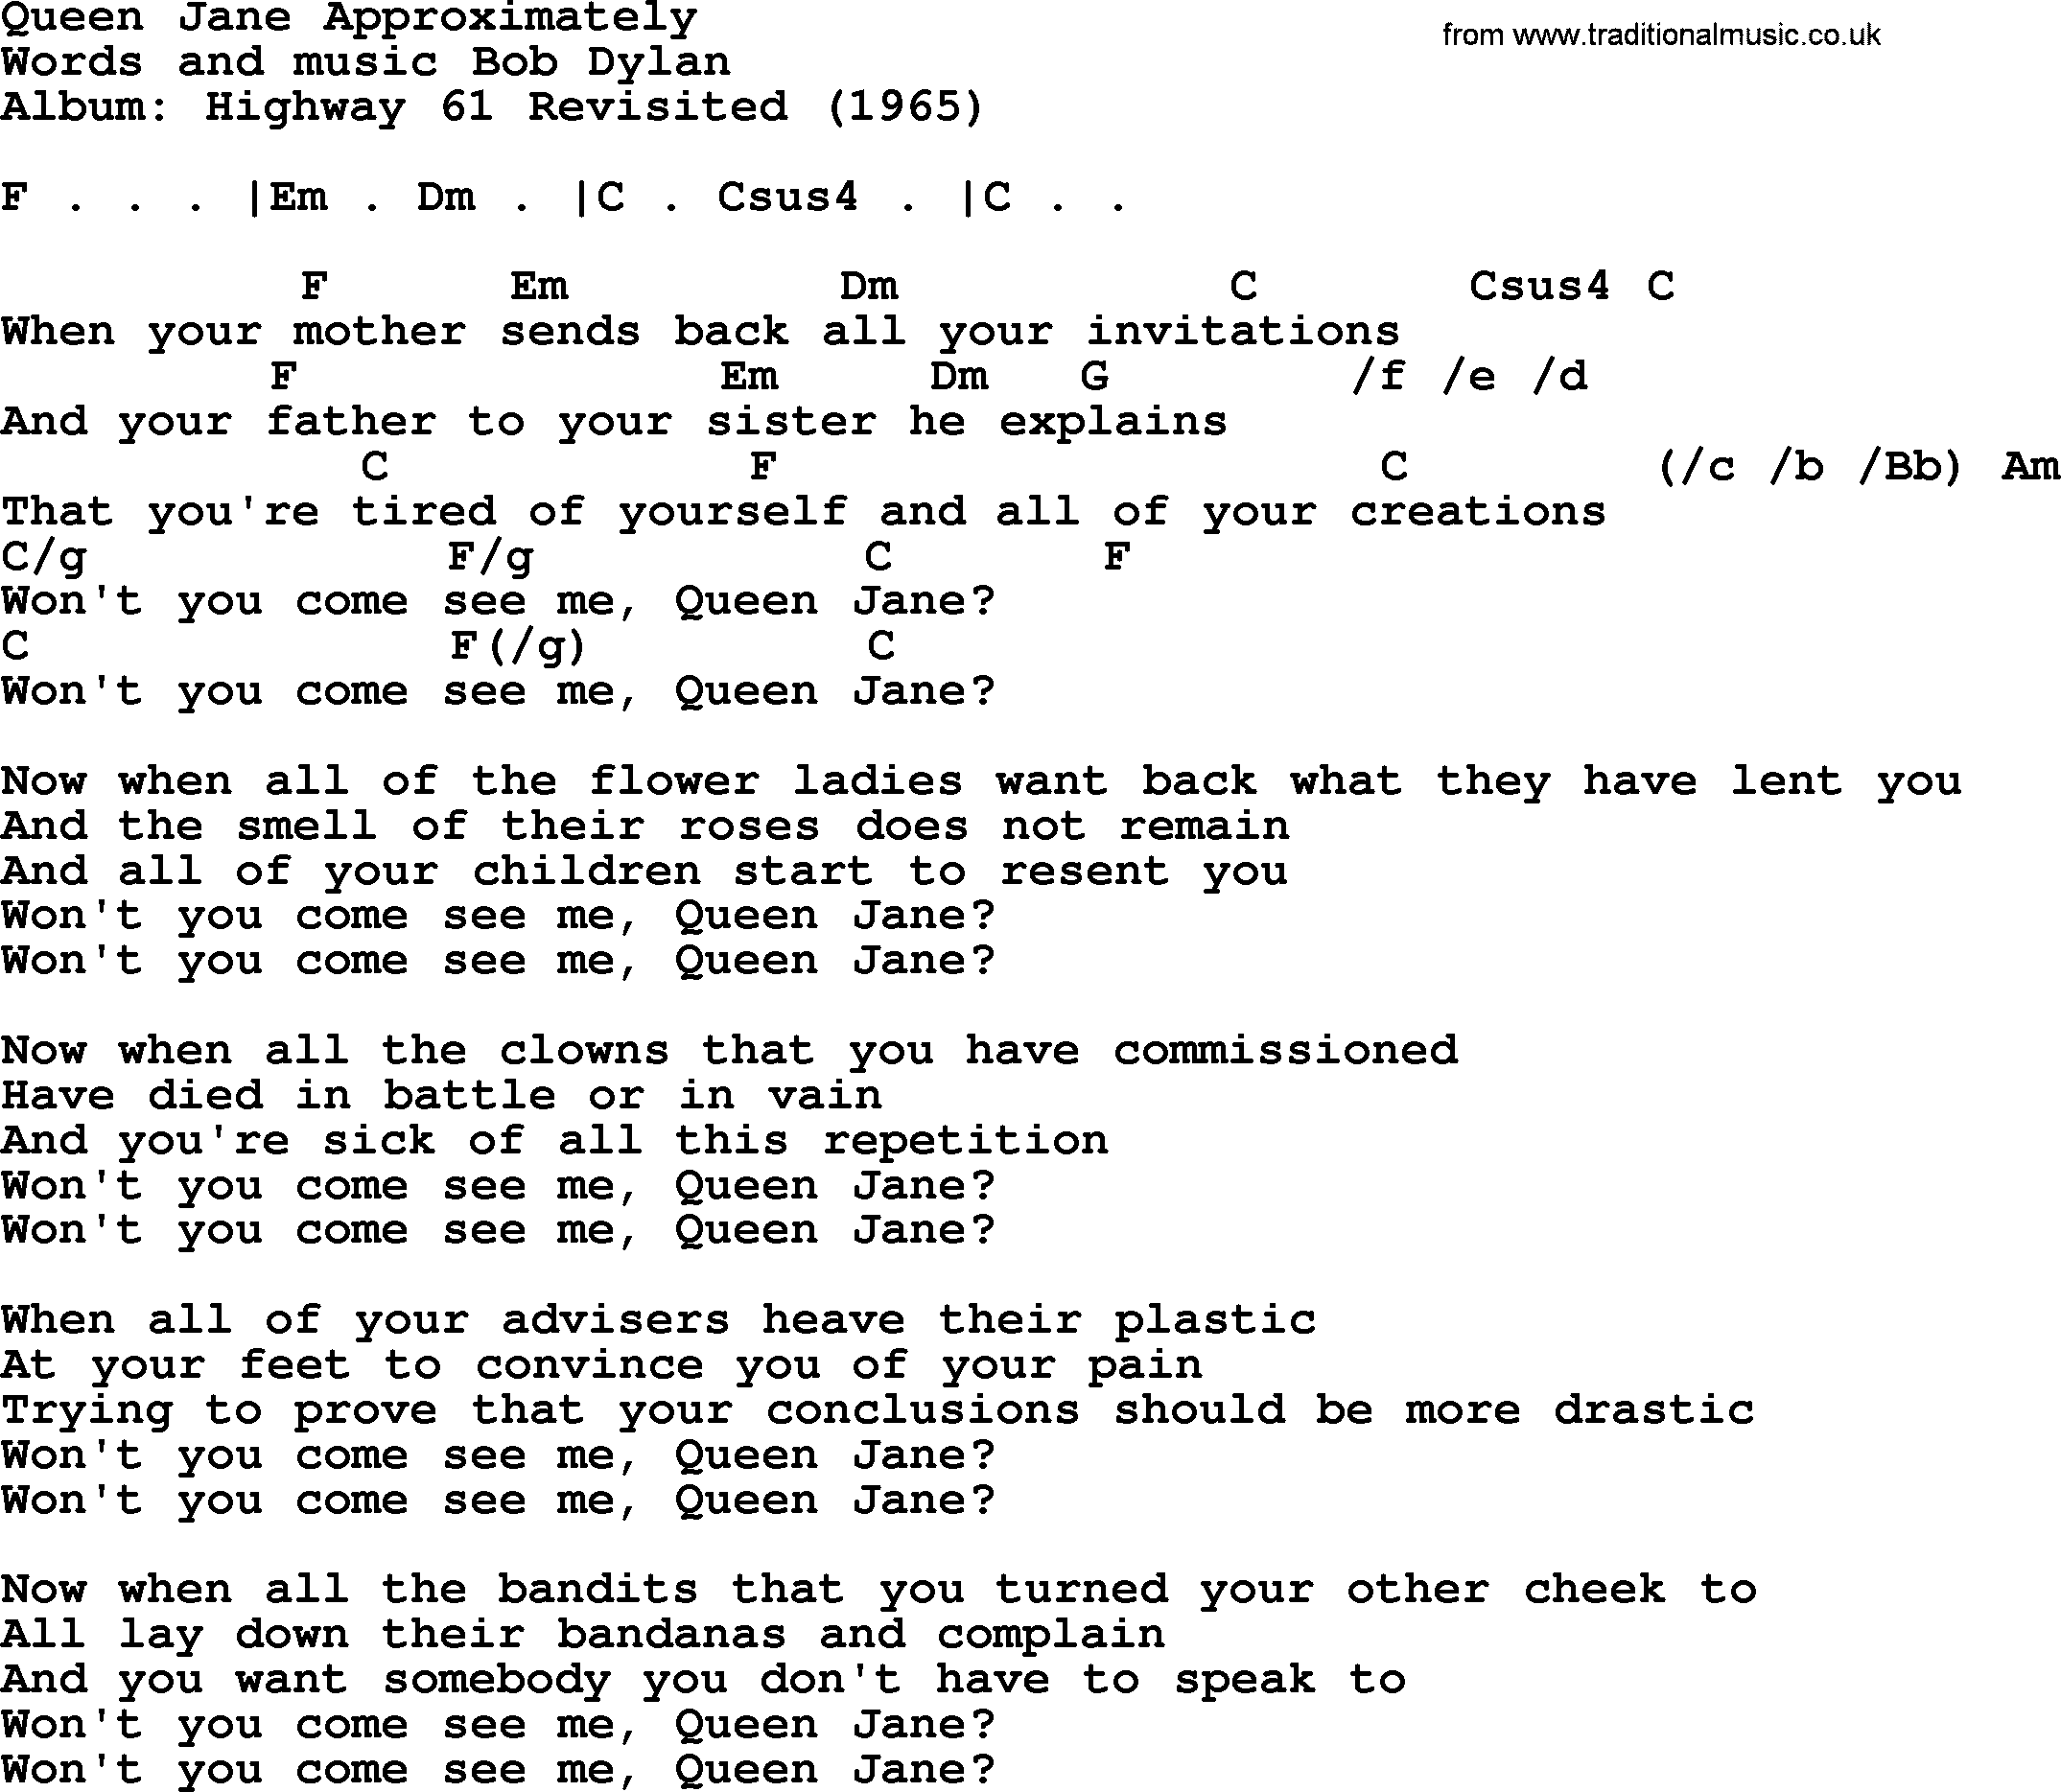 Bob Dylan song, lyrics with chords - Queen Jane Approximately